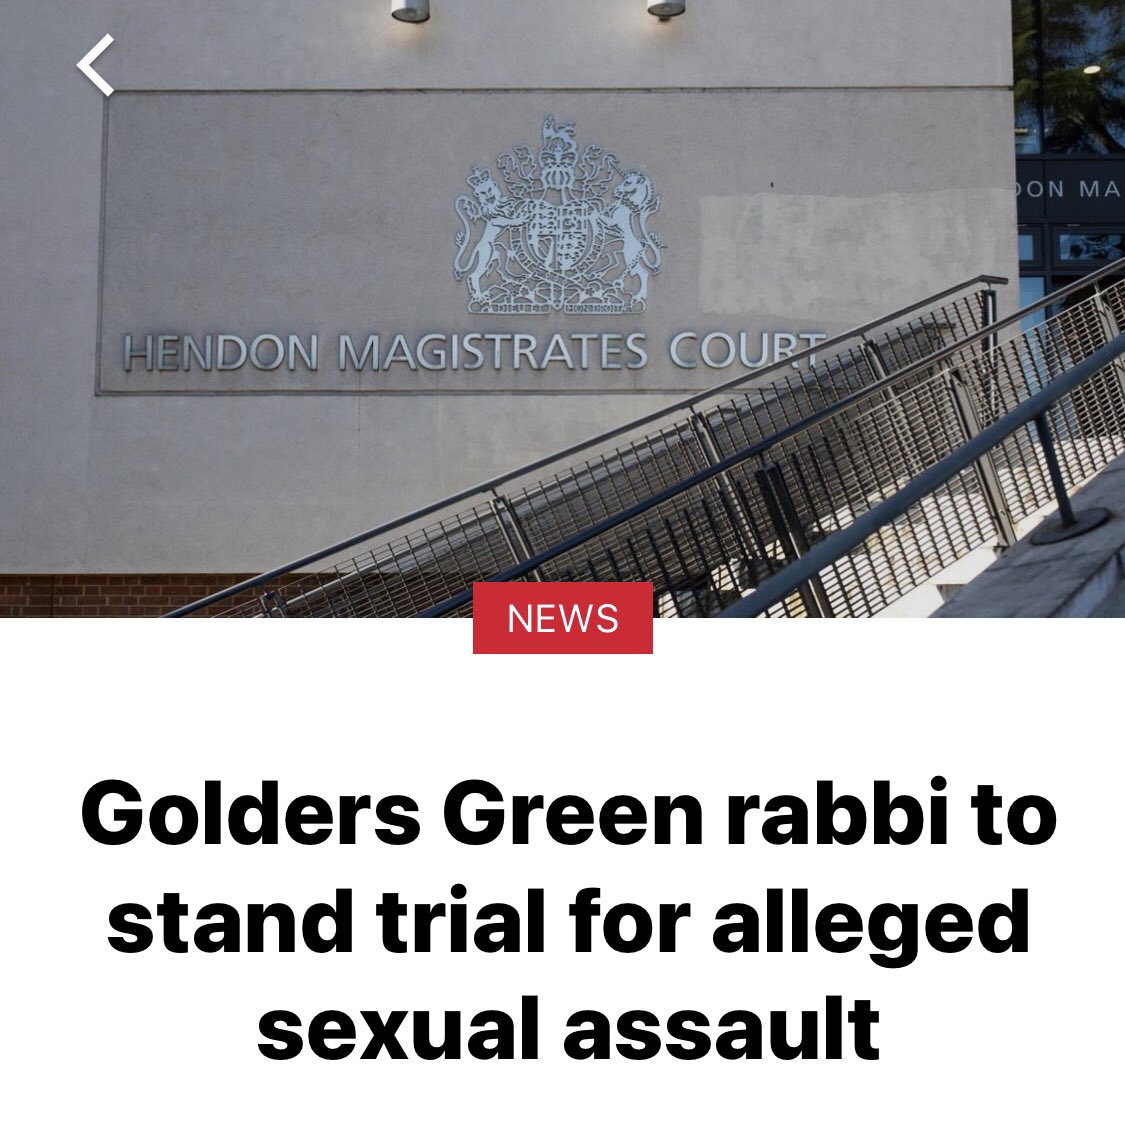 RABBI TO STAND TRIAL OVER ALLEGED SEXUAL ASSAULT IN GOLDERS GREEN ✡️Aaron Halpern, also known as Chaim Halpern, 65, of Golders Green, has been charged with two counts of sexual assault on a woman alleged to have taken place between June 1 and July 31 2022. 🕎He pleaded not